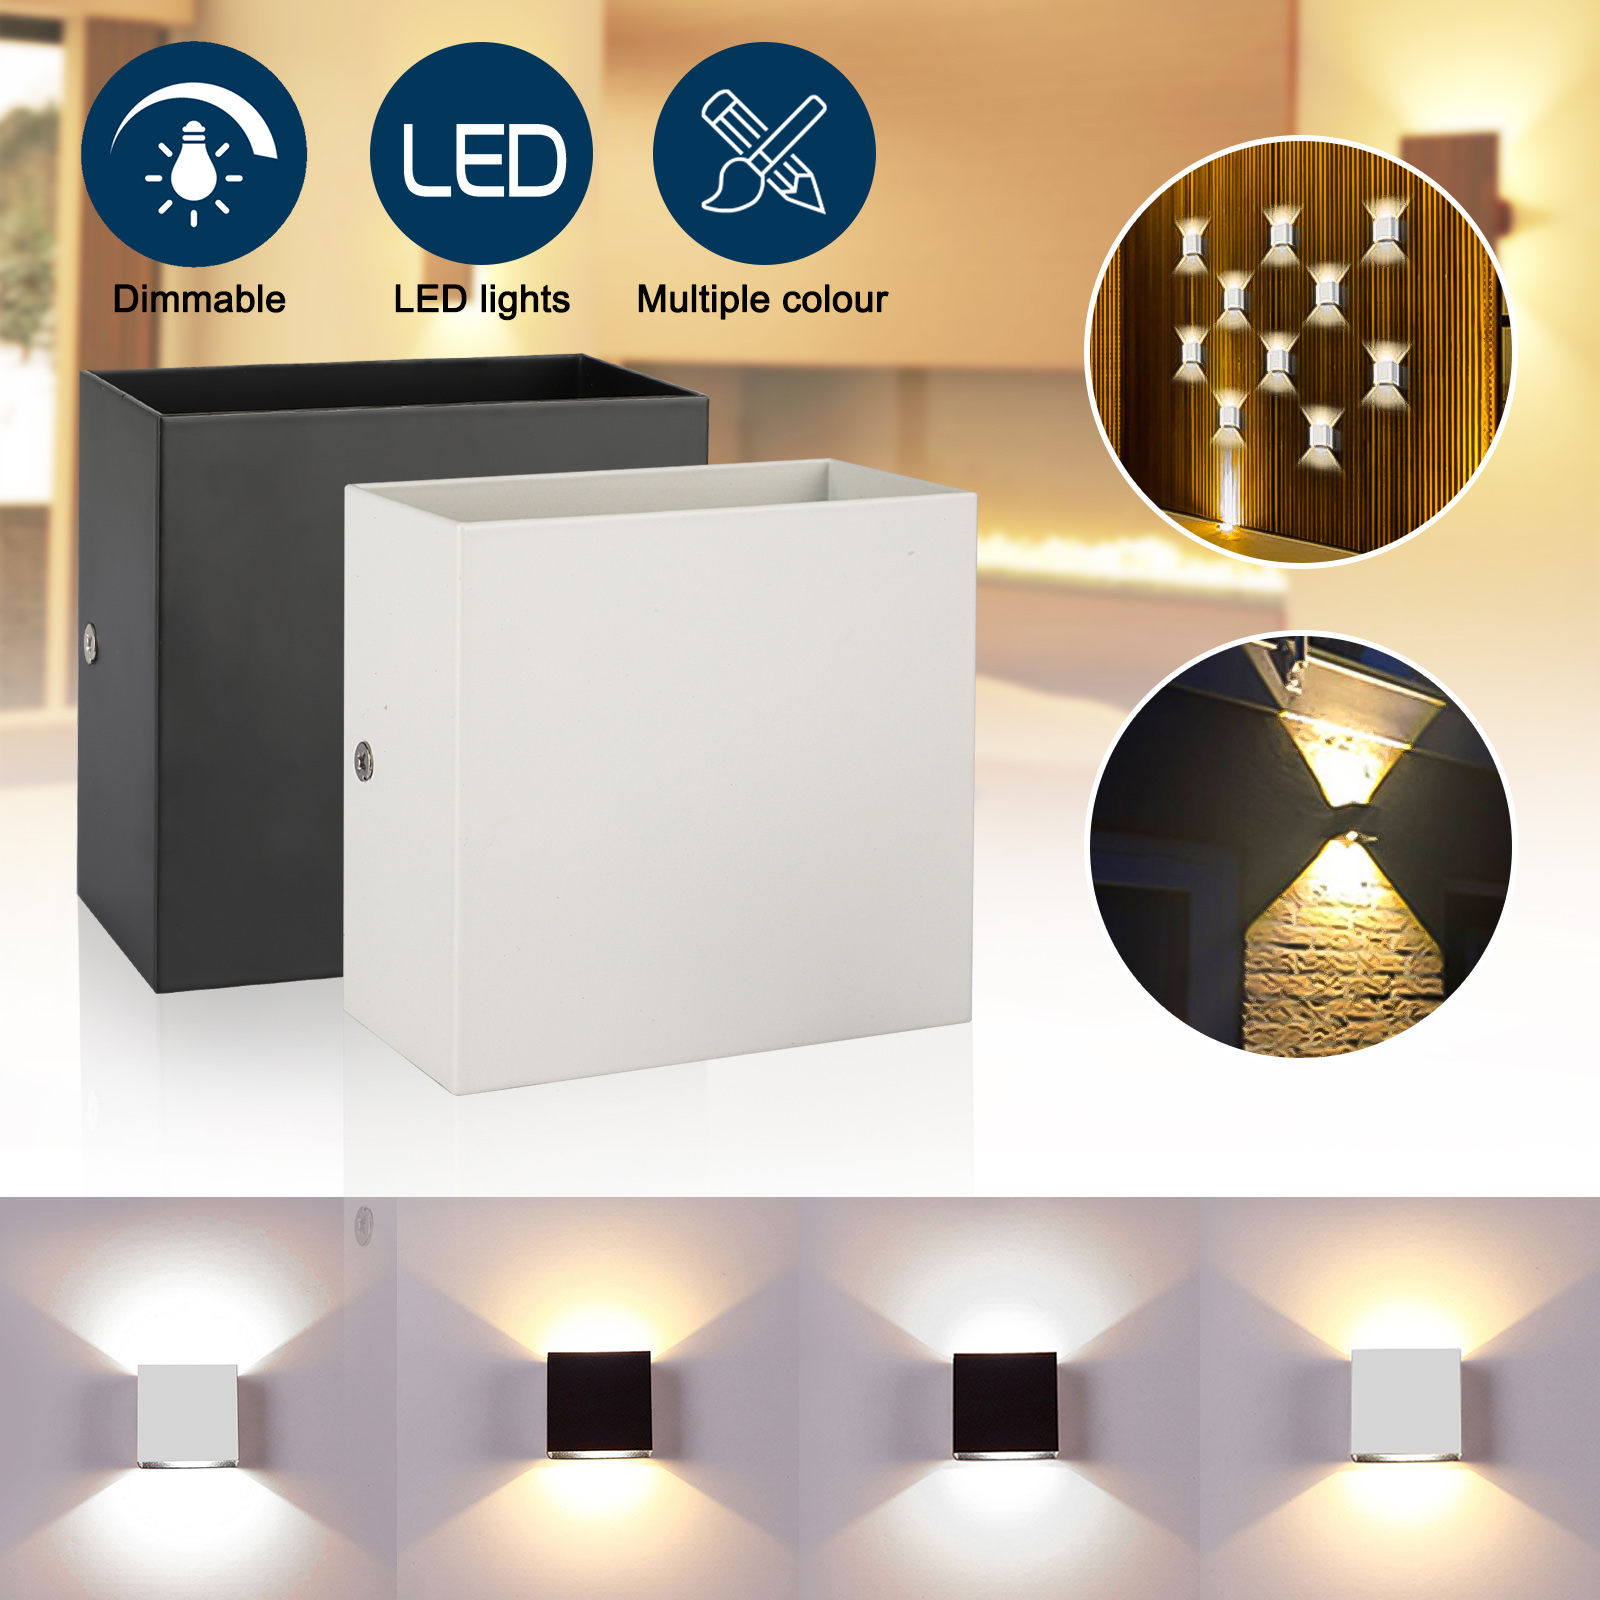 Modern Fashion LED Wall Light Up Down Cube Indoor Outdoor Room Sconce Decor Lamp 